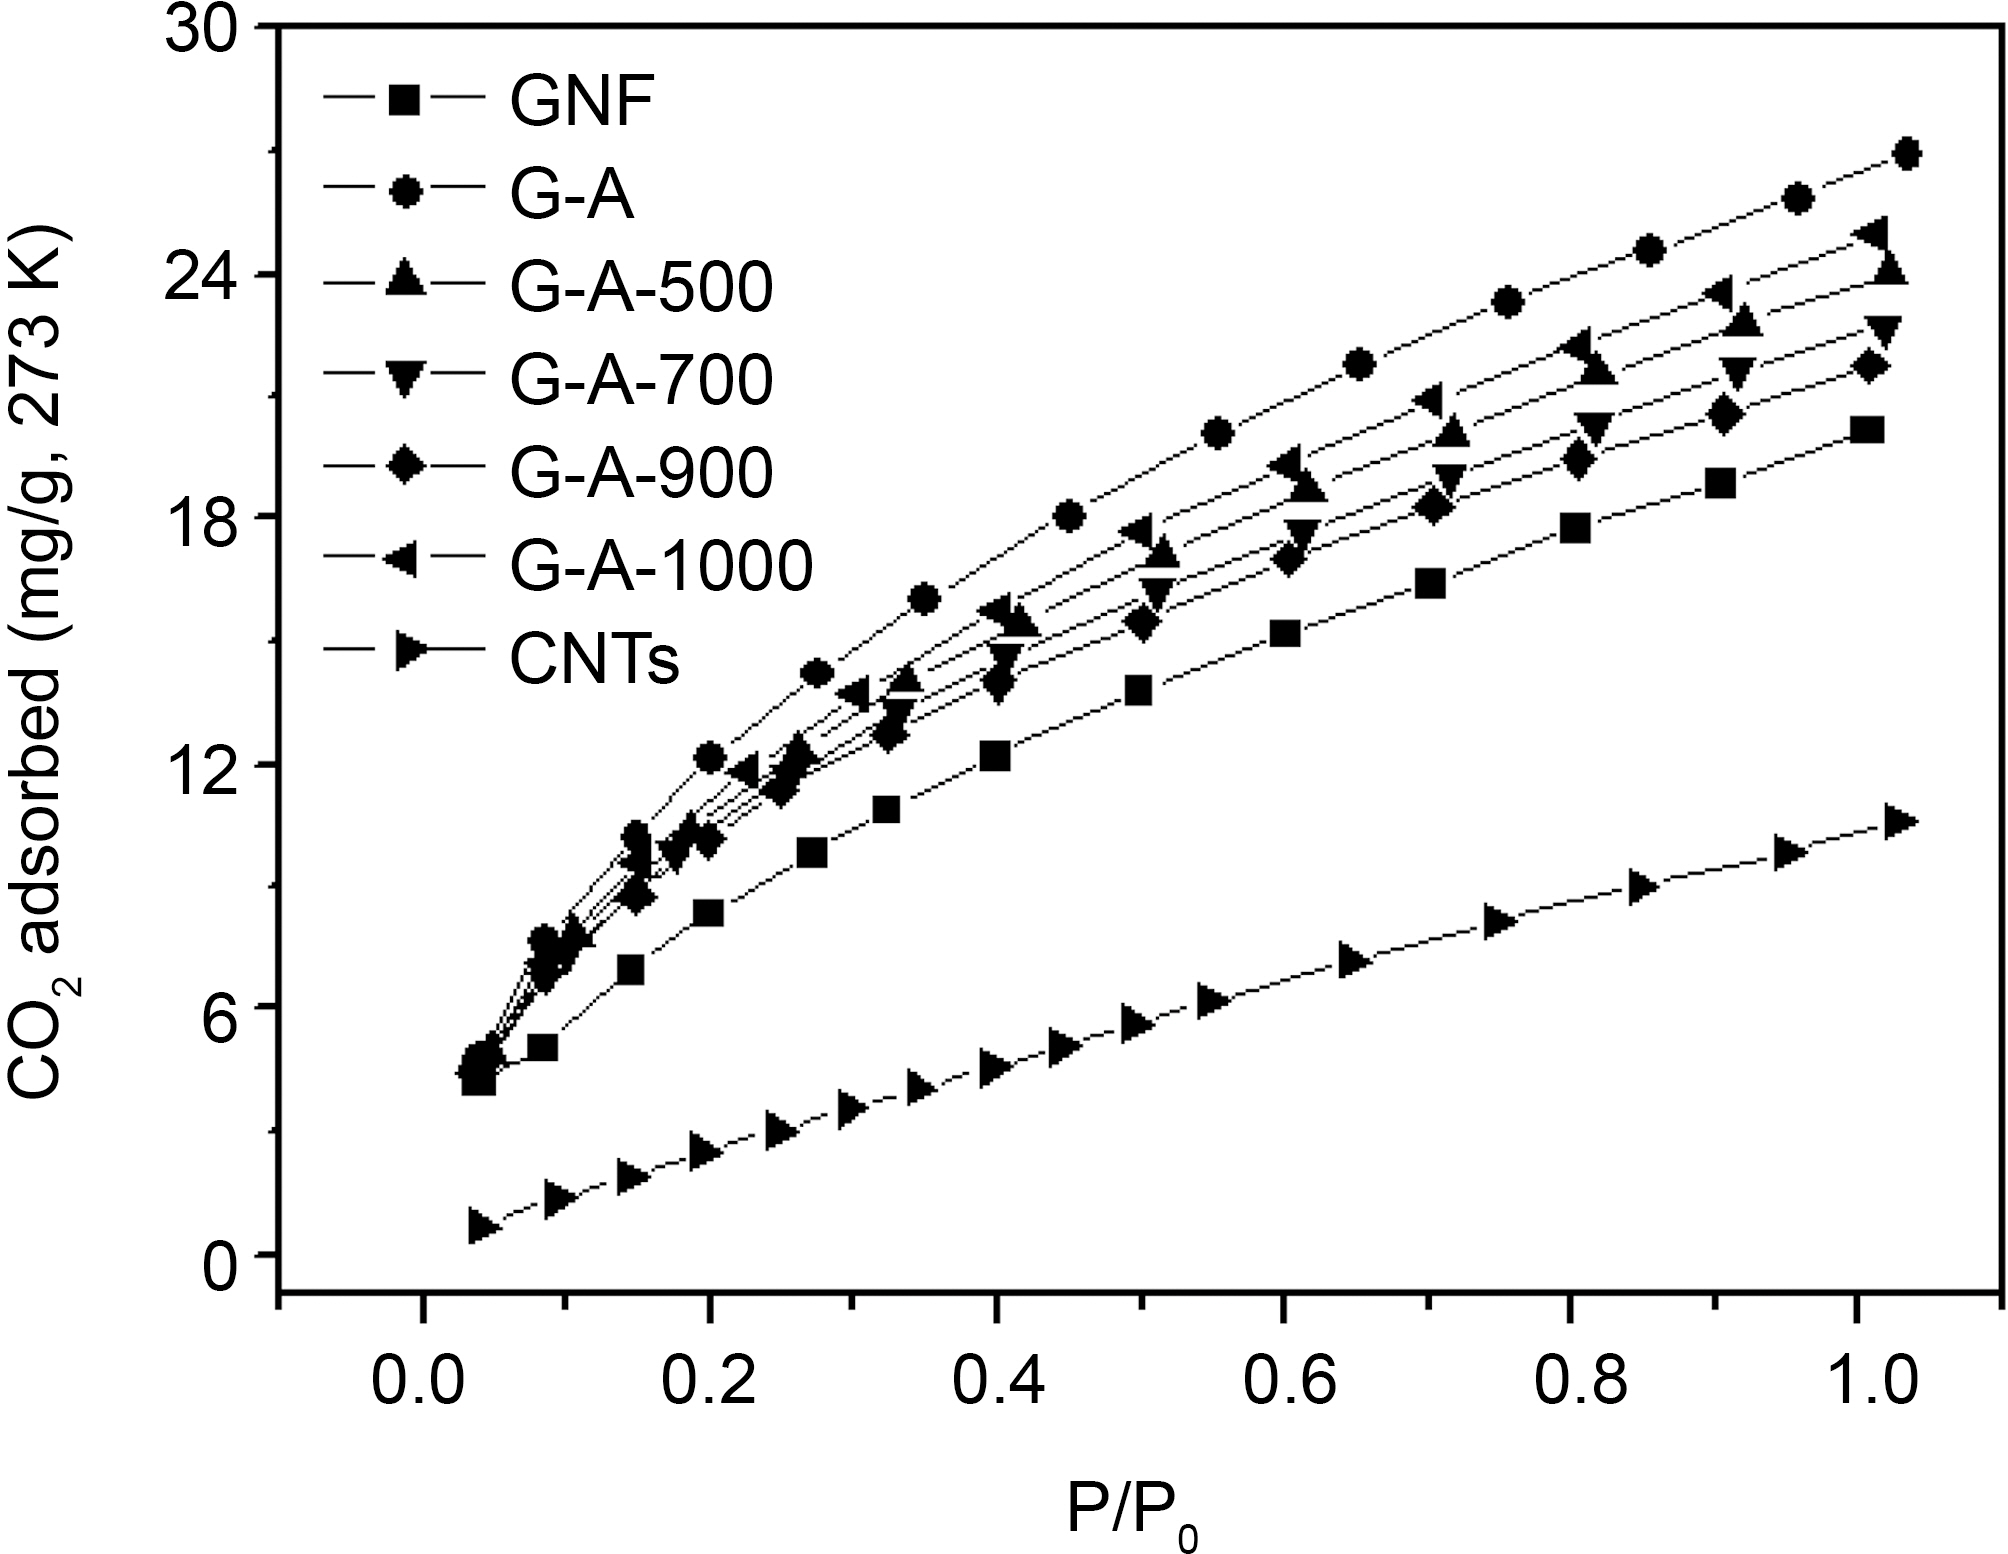 Carbon dioxide adsorption behaviors of the pristine GNFs treated GNFs and CNTs measured at 273 K.